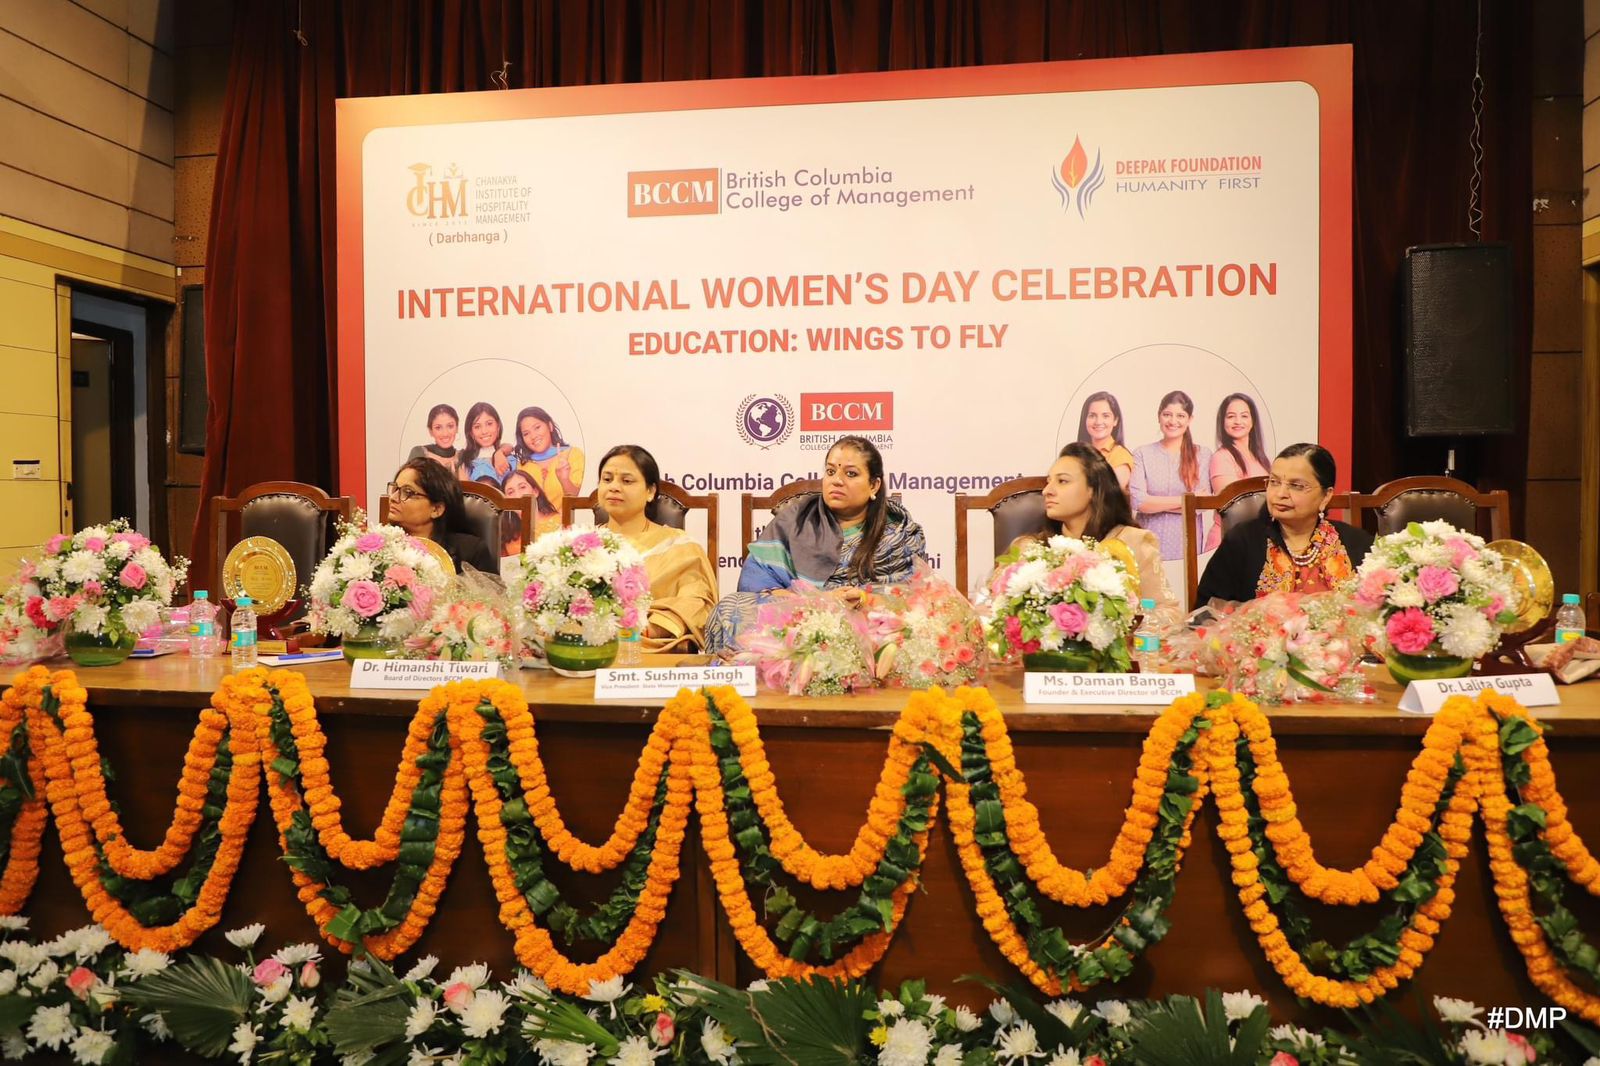 BCCM College marks International Women’s Day with tribute to women’s achievements